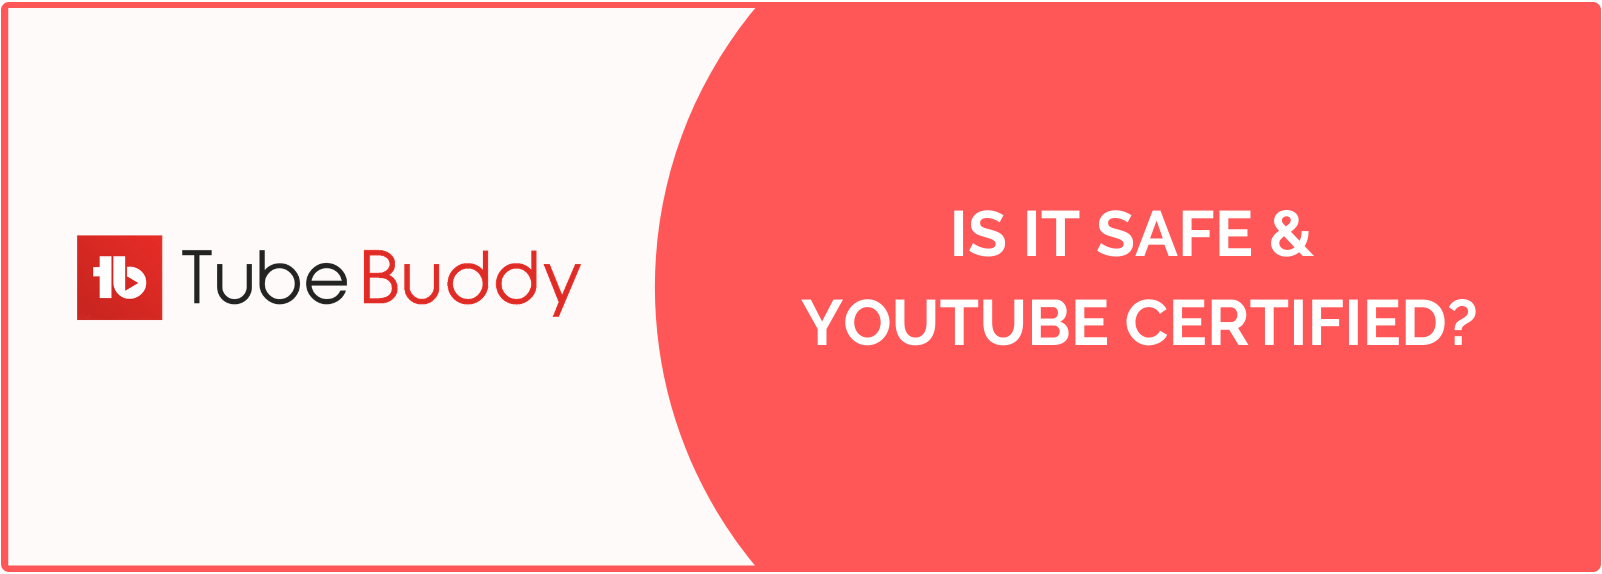 Is TubeBuddy Safe And YouTube Certified